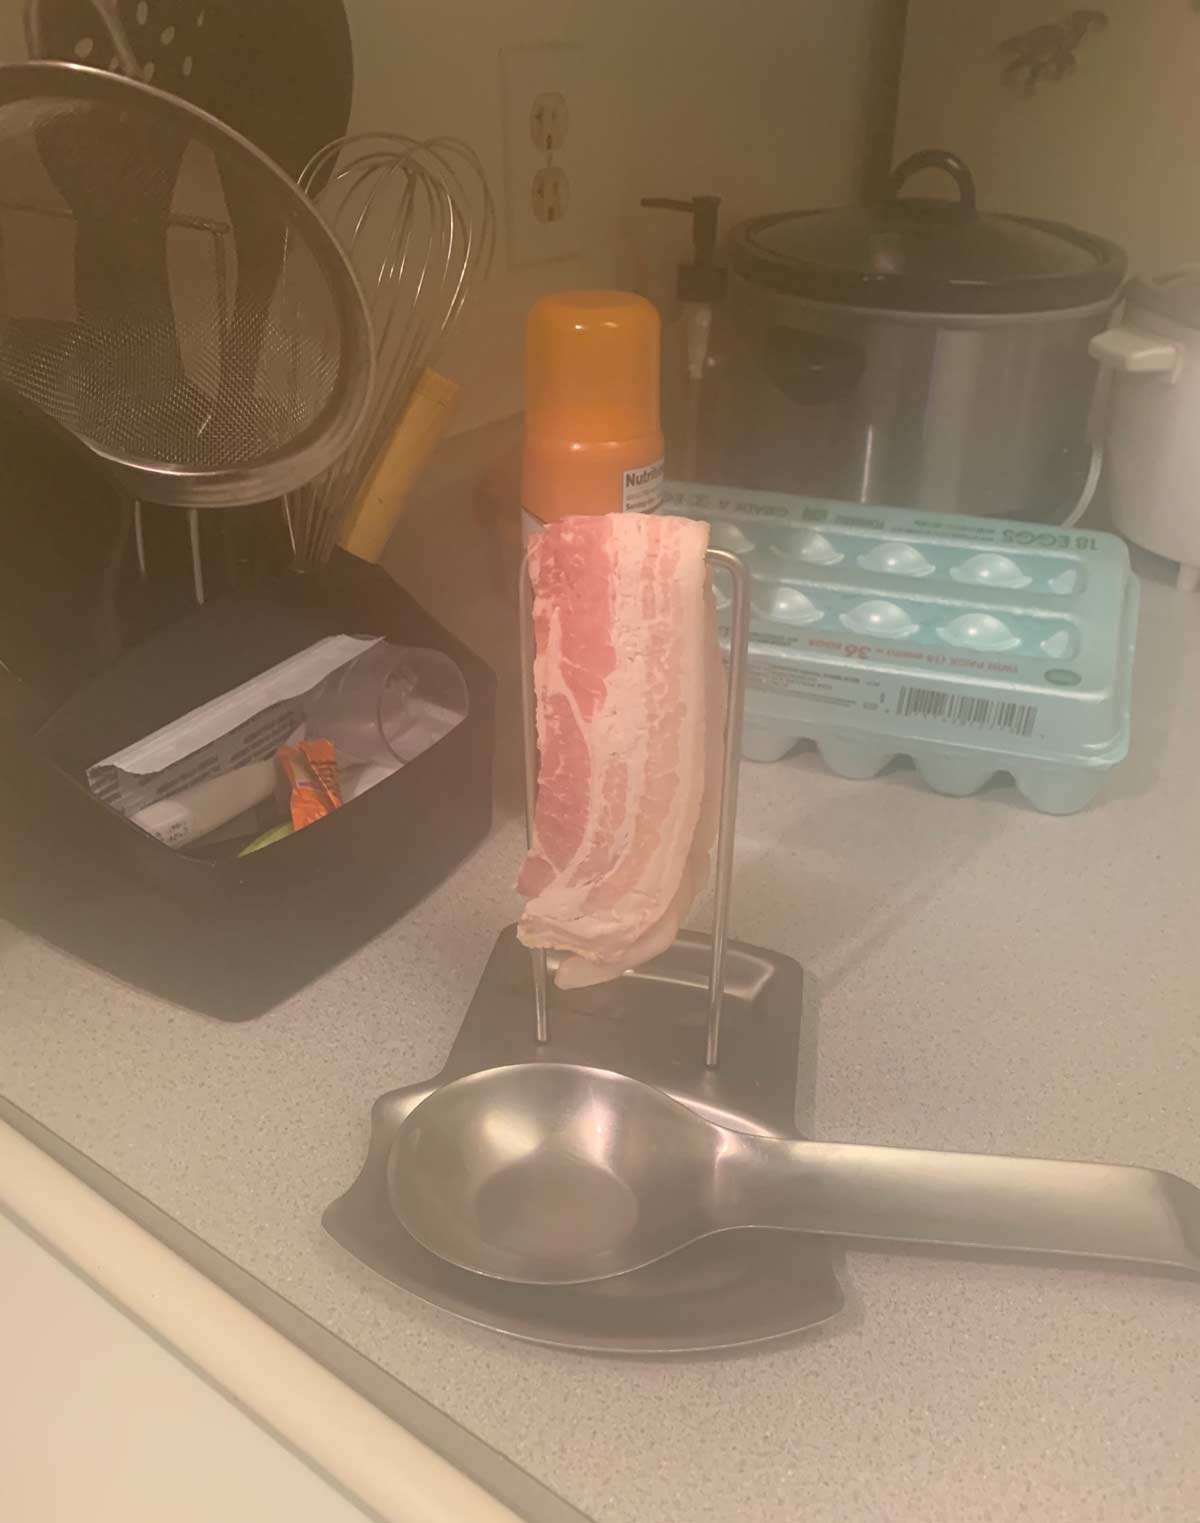 My wife's way of getting the bacon ready to be cooked is something I will never understand...